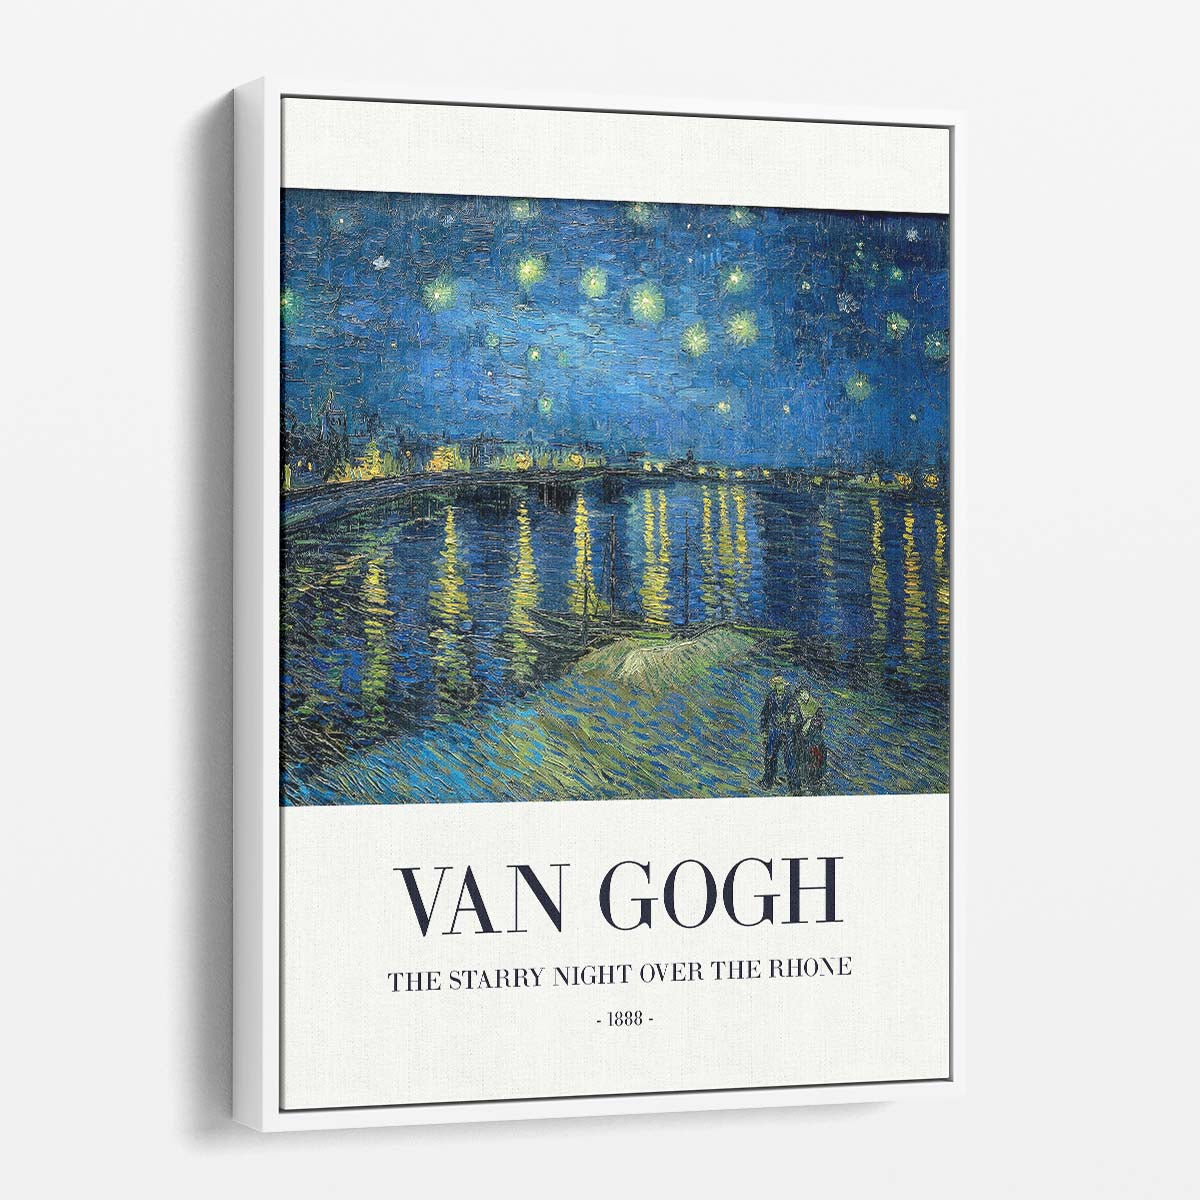 Vincent Van Gogh's Starry Night Over The Rhone Acrylic Painting Poster by Luxuriance Designs, made in USA